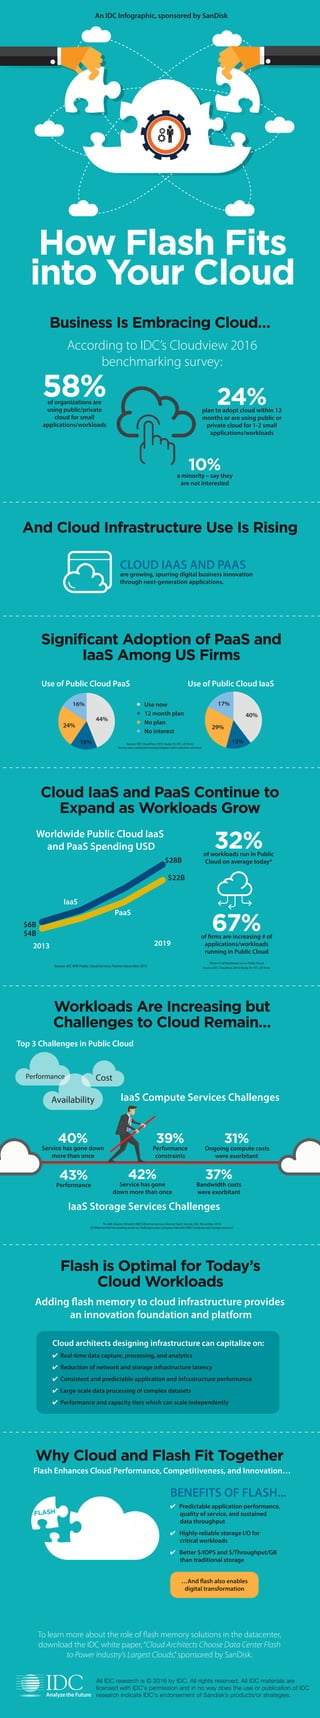 All IDC research is © 2016 by IDC. All rights reserved. All IDC materials are
licensed with IDC's permission and in no way does the use or publication of IDC
research indicate IDC's endorsement of Sandisk’s products/or strategies.
How Flash Fits
into Your Cloud
An IDC Infographic, sponsored by SanDisk
Business Is Embracing Cloud…
According to IDC’s Cloudview 2016
benchmarking survey:
58%of organizations are
using public/private
cloud for small
applications/workloads
24%plan to adopt cloud within 12
months or are using public or
private cloud for 1-2 small
applications/workloads
10%a minority – say they
are not interested
And Cloud Infrastructure Use Is Rising
CLOUD IAAS AND PAAS
are growing, spurring digital business innovation
through next-generation applications.
Significant Adoption of PaaS and
IaaS Among US Firms
Use of Public Cloud PaaS Use of Public Cloud IaaS
Source: IDC CloudView 2016 Study, N=701, US firms
Survey was conducted among adopters and evaluators of cloud.
Cloud IaaS and PaaS Continue to
Expand as Workloads Grow
Worldwide Public Cloud IaaS
and PaaS Spending USD 32%of workloads run in Public
Cloud on average today*
67%of firms are increasing # of
applications/workloads
running in Public Cloud
Source: IDC WW Public Cloud Services Tracker December 2015
*Mean % of Workloads run in Public Cloud
Source: IDC CloudView 2016 Study, N=701, US firms
Workloads Are Increasing but
Challenges to Cloud Remain…
Top 3 Challenges in Public Cloud
37%
Bandwidth costs
were exorbitant
N=368. Source: Amazon AWS Infrastructure as a Service (IaaS) Survey, IDC, November 2014
Q. What are the two leading issues or challenges your company had with AWS Compute and Storage services?
Why Cloud and Flash Fit Together
Flash Enhances Cloud Performance, Competitiveness, and Innovation…
…And flash also enables
digital transformation
BENEFITS OF FLASH...
✔ Predictable application performance,
quality of service, and sustained
data throughput
✔ Highly-reliable storage I/O for
critical workloads
✔ Better $/IOPS and $/Throughput/GB
than traditional storage
Flash is Optimal for Today’s
Cloud Workloads
Cloud architects designing infrastructure can capitalize on:
✔ Real-time data capture, processing, and analytics
✔ Reduction of network and storage infrastructure latency
✔ Consistent and predictable application and infrastructure performance
✔ Large-scale data processing of complex datasets
✔ Performance and capacity tiers which can scale independently
To learn more about the role of flash memory solutions in the datacenter,
download the IDC white paper,“Cloud Architects Choose Data Center Flash
to Power Industry's Largest Clouds,”sponsored by SanDisk.
44%
16%
24%
16% 17%
40%
15%
29%
• Use now
• 12 month plan
• No plan
• No interest
2013
IaaS
PaaS
$4B
$6B
$28B
$22B
2019
Performance
Availability
Cost
IaaS Compute Services Challenges
IaaS Storage Services Challenges
Adding flash memory to cloud infrastructure provides
an innovation foundation and platform
40%
Service has gone down
more than once
39%
Performance
constraints
31%
Ongoing compute costs
were exorbitant
43%
Performance
42%
Service has gone
down more than once
FLASH
 